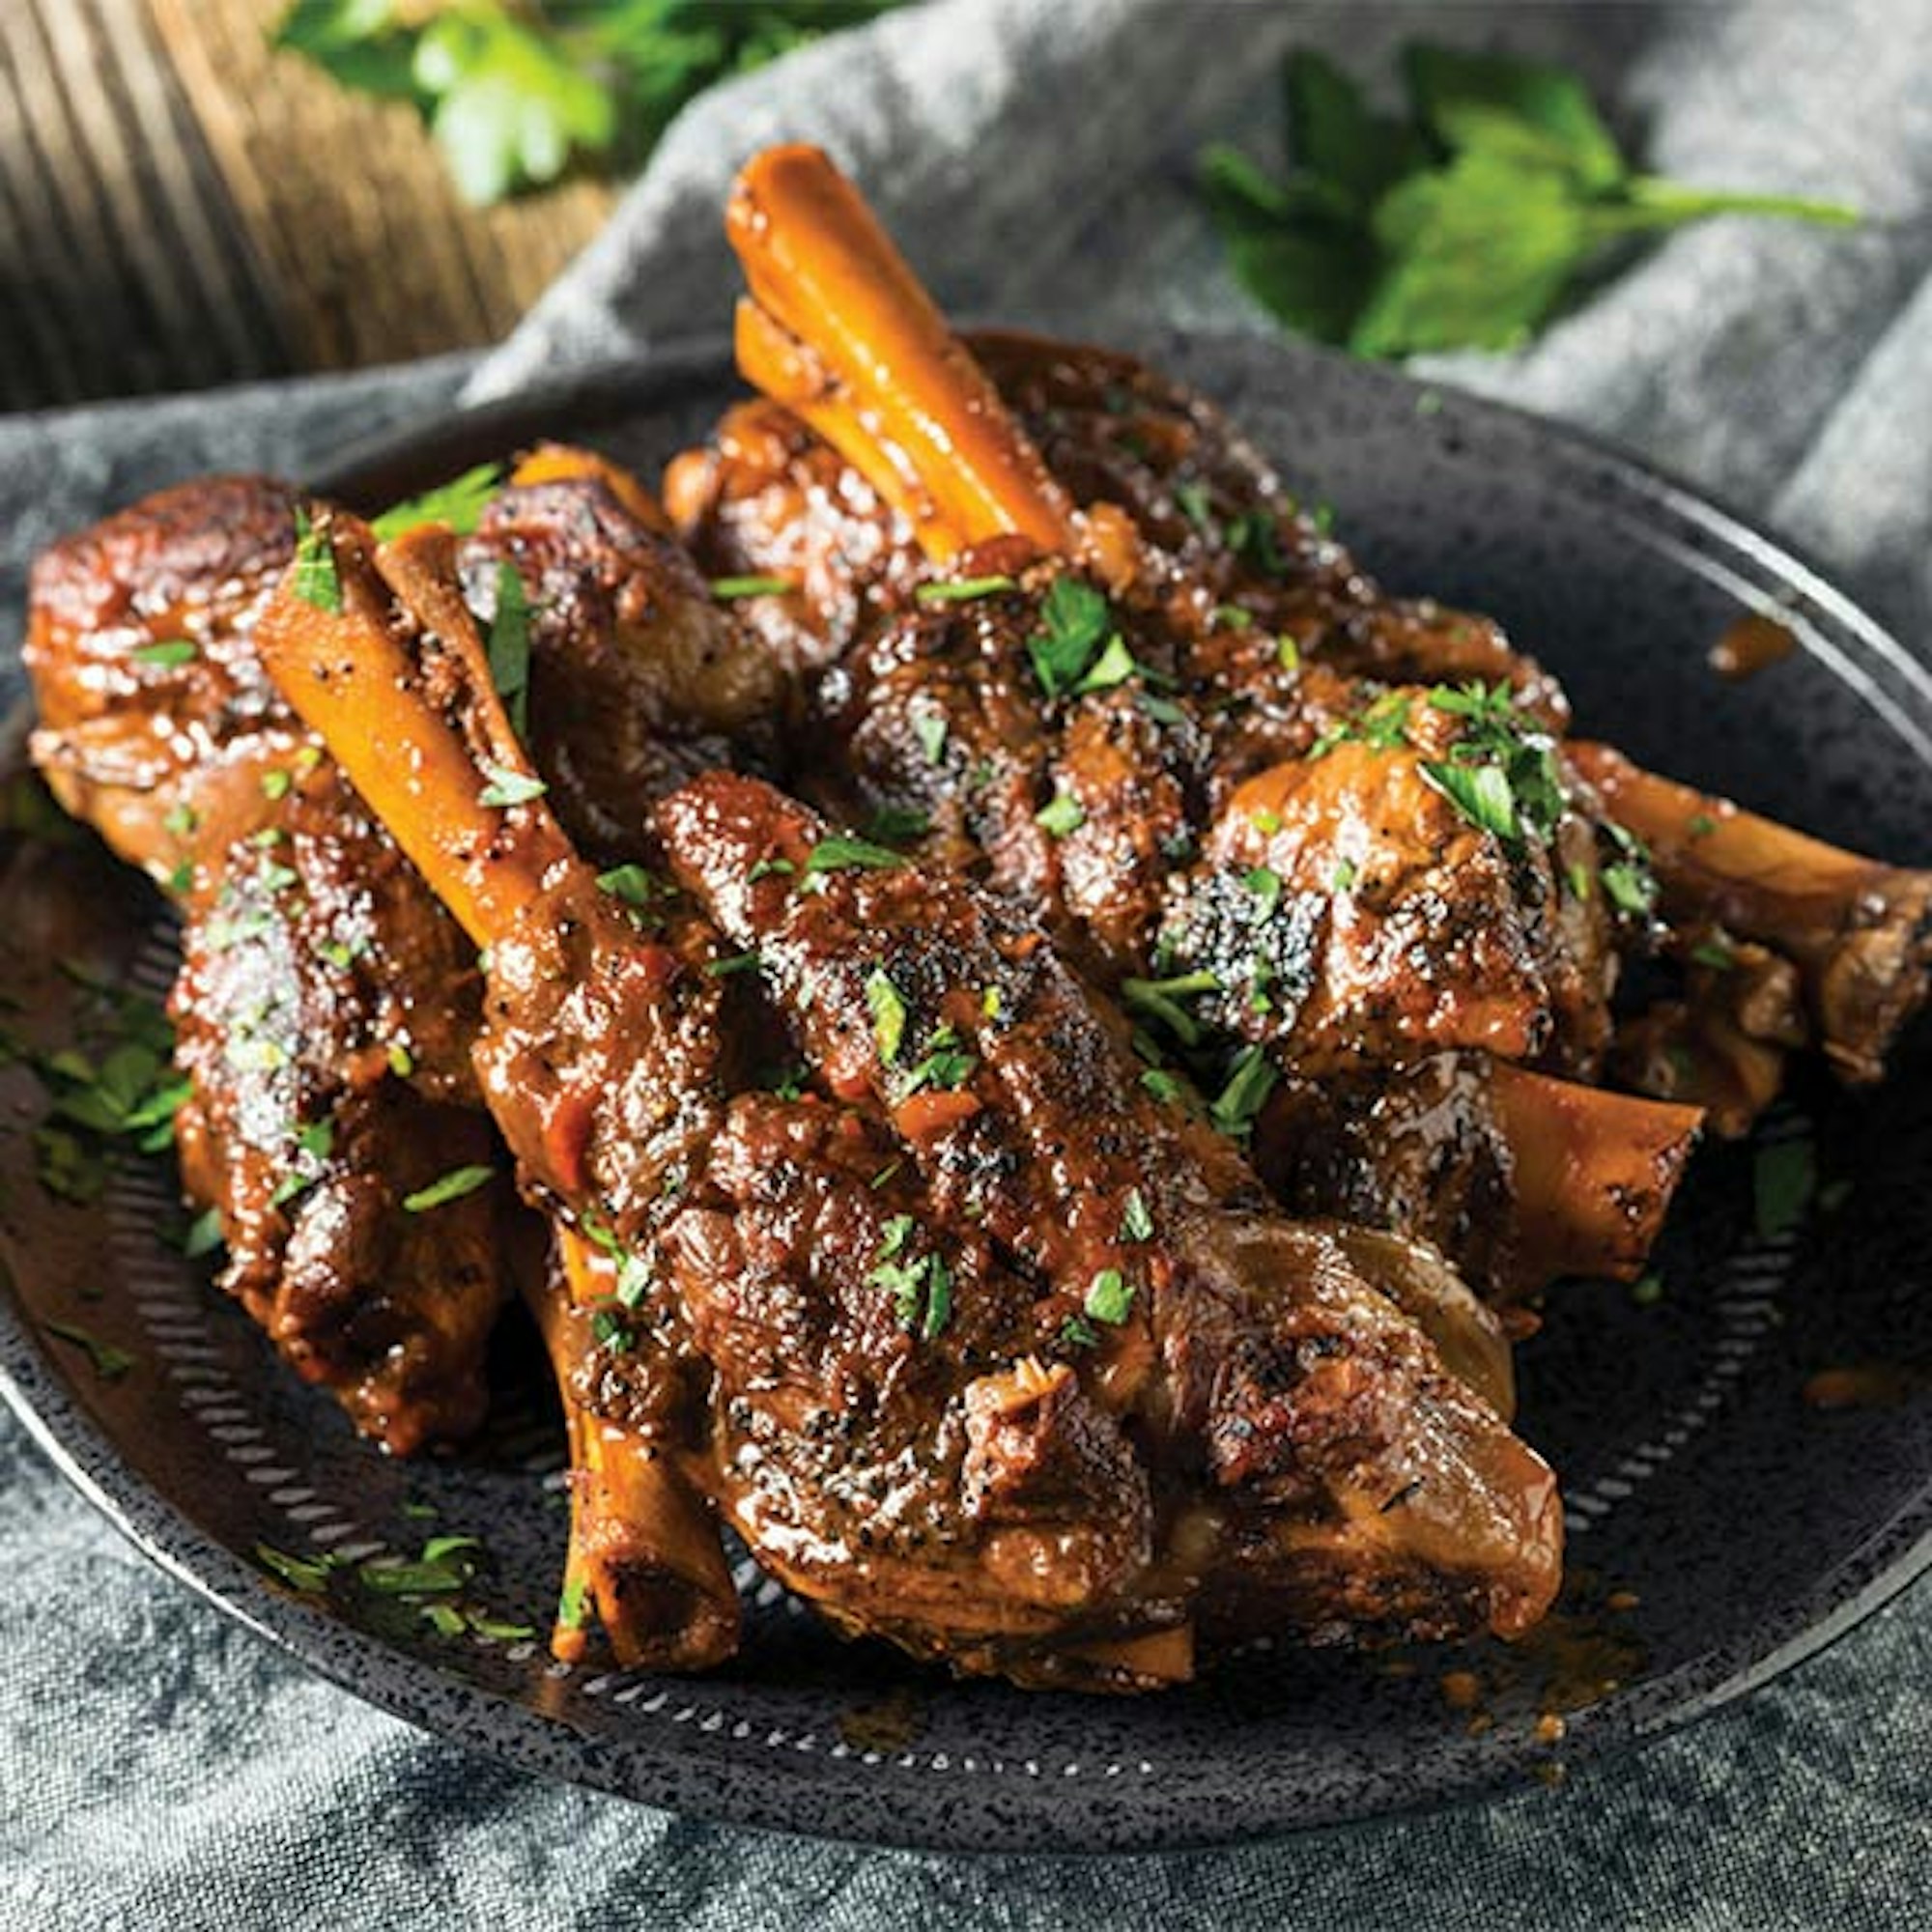 Slow Cooker 12 Hour Lamb Shanks recipe | Baccarat The Tasty Chef 6L Slow Cooker